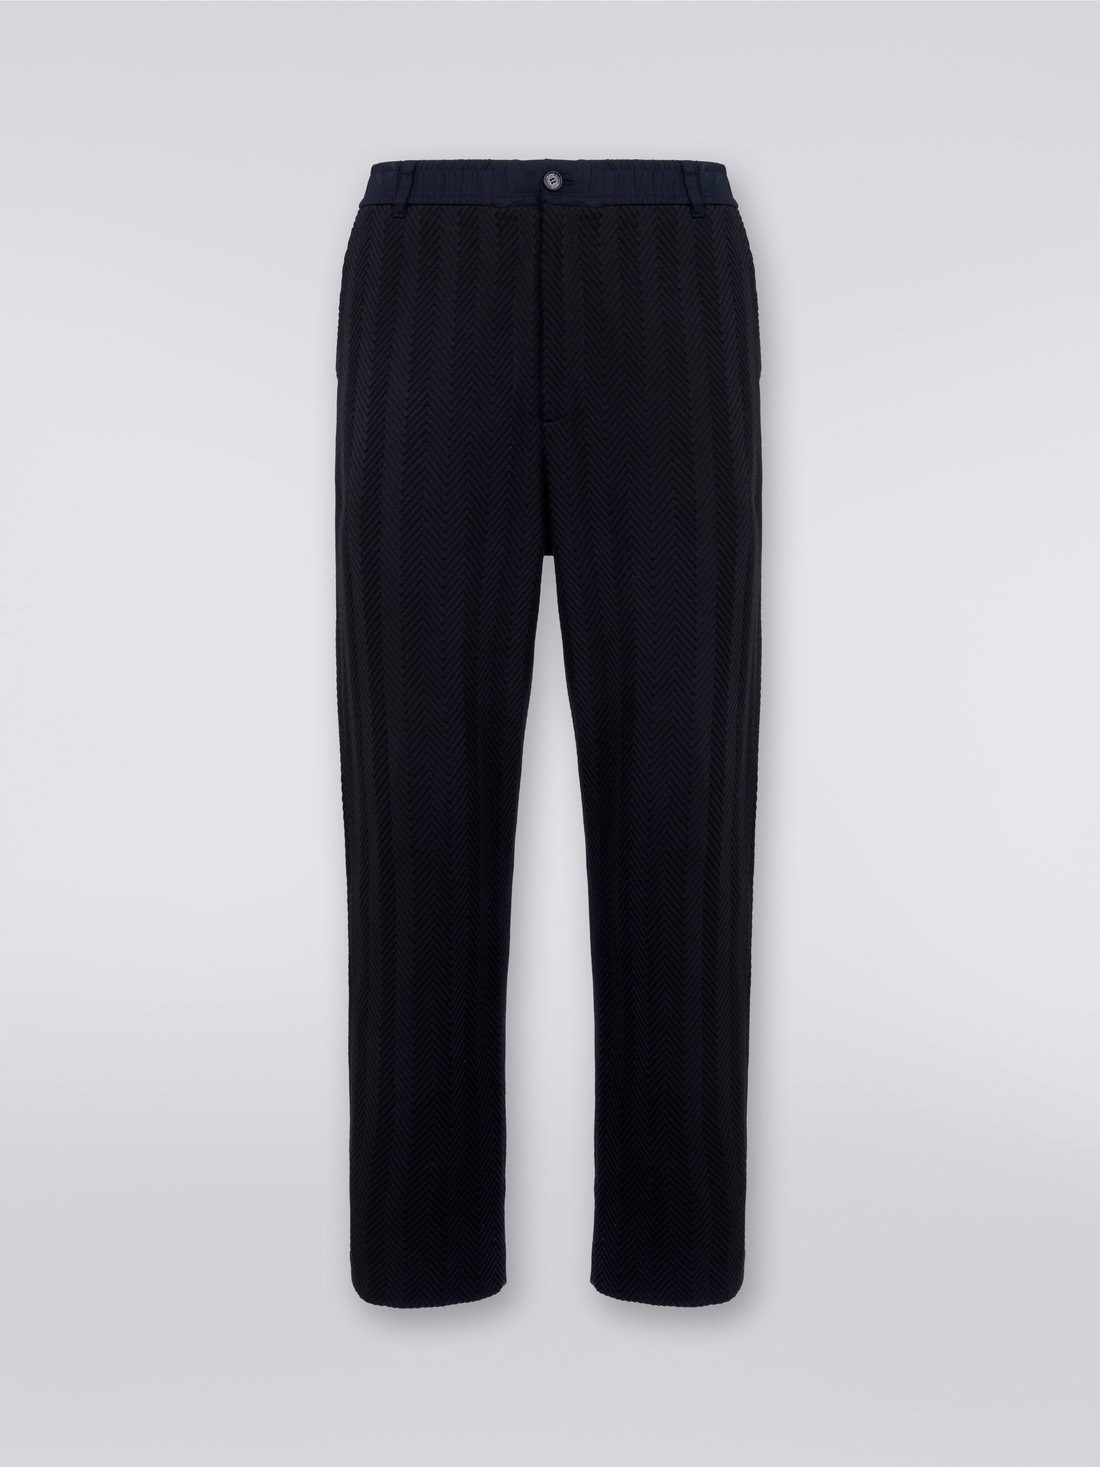 Classic cotton and viscose zigzag trousers , Black    - 0